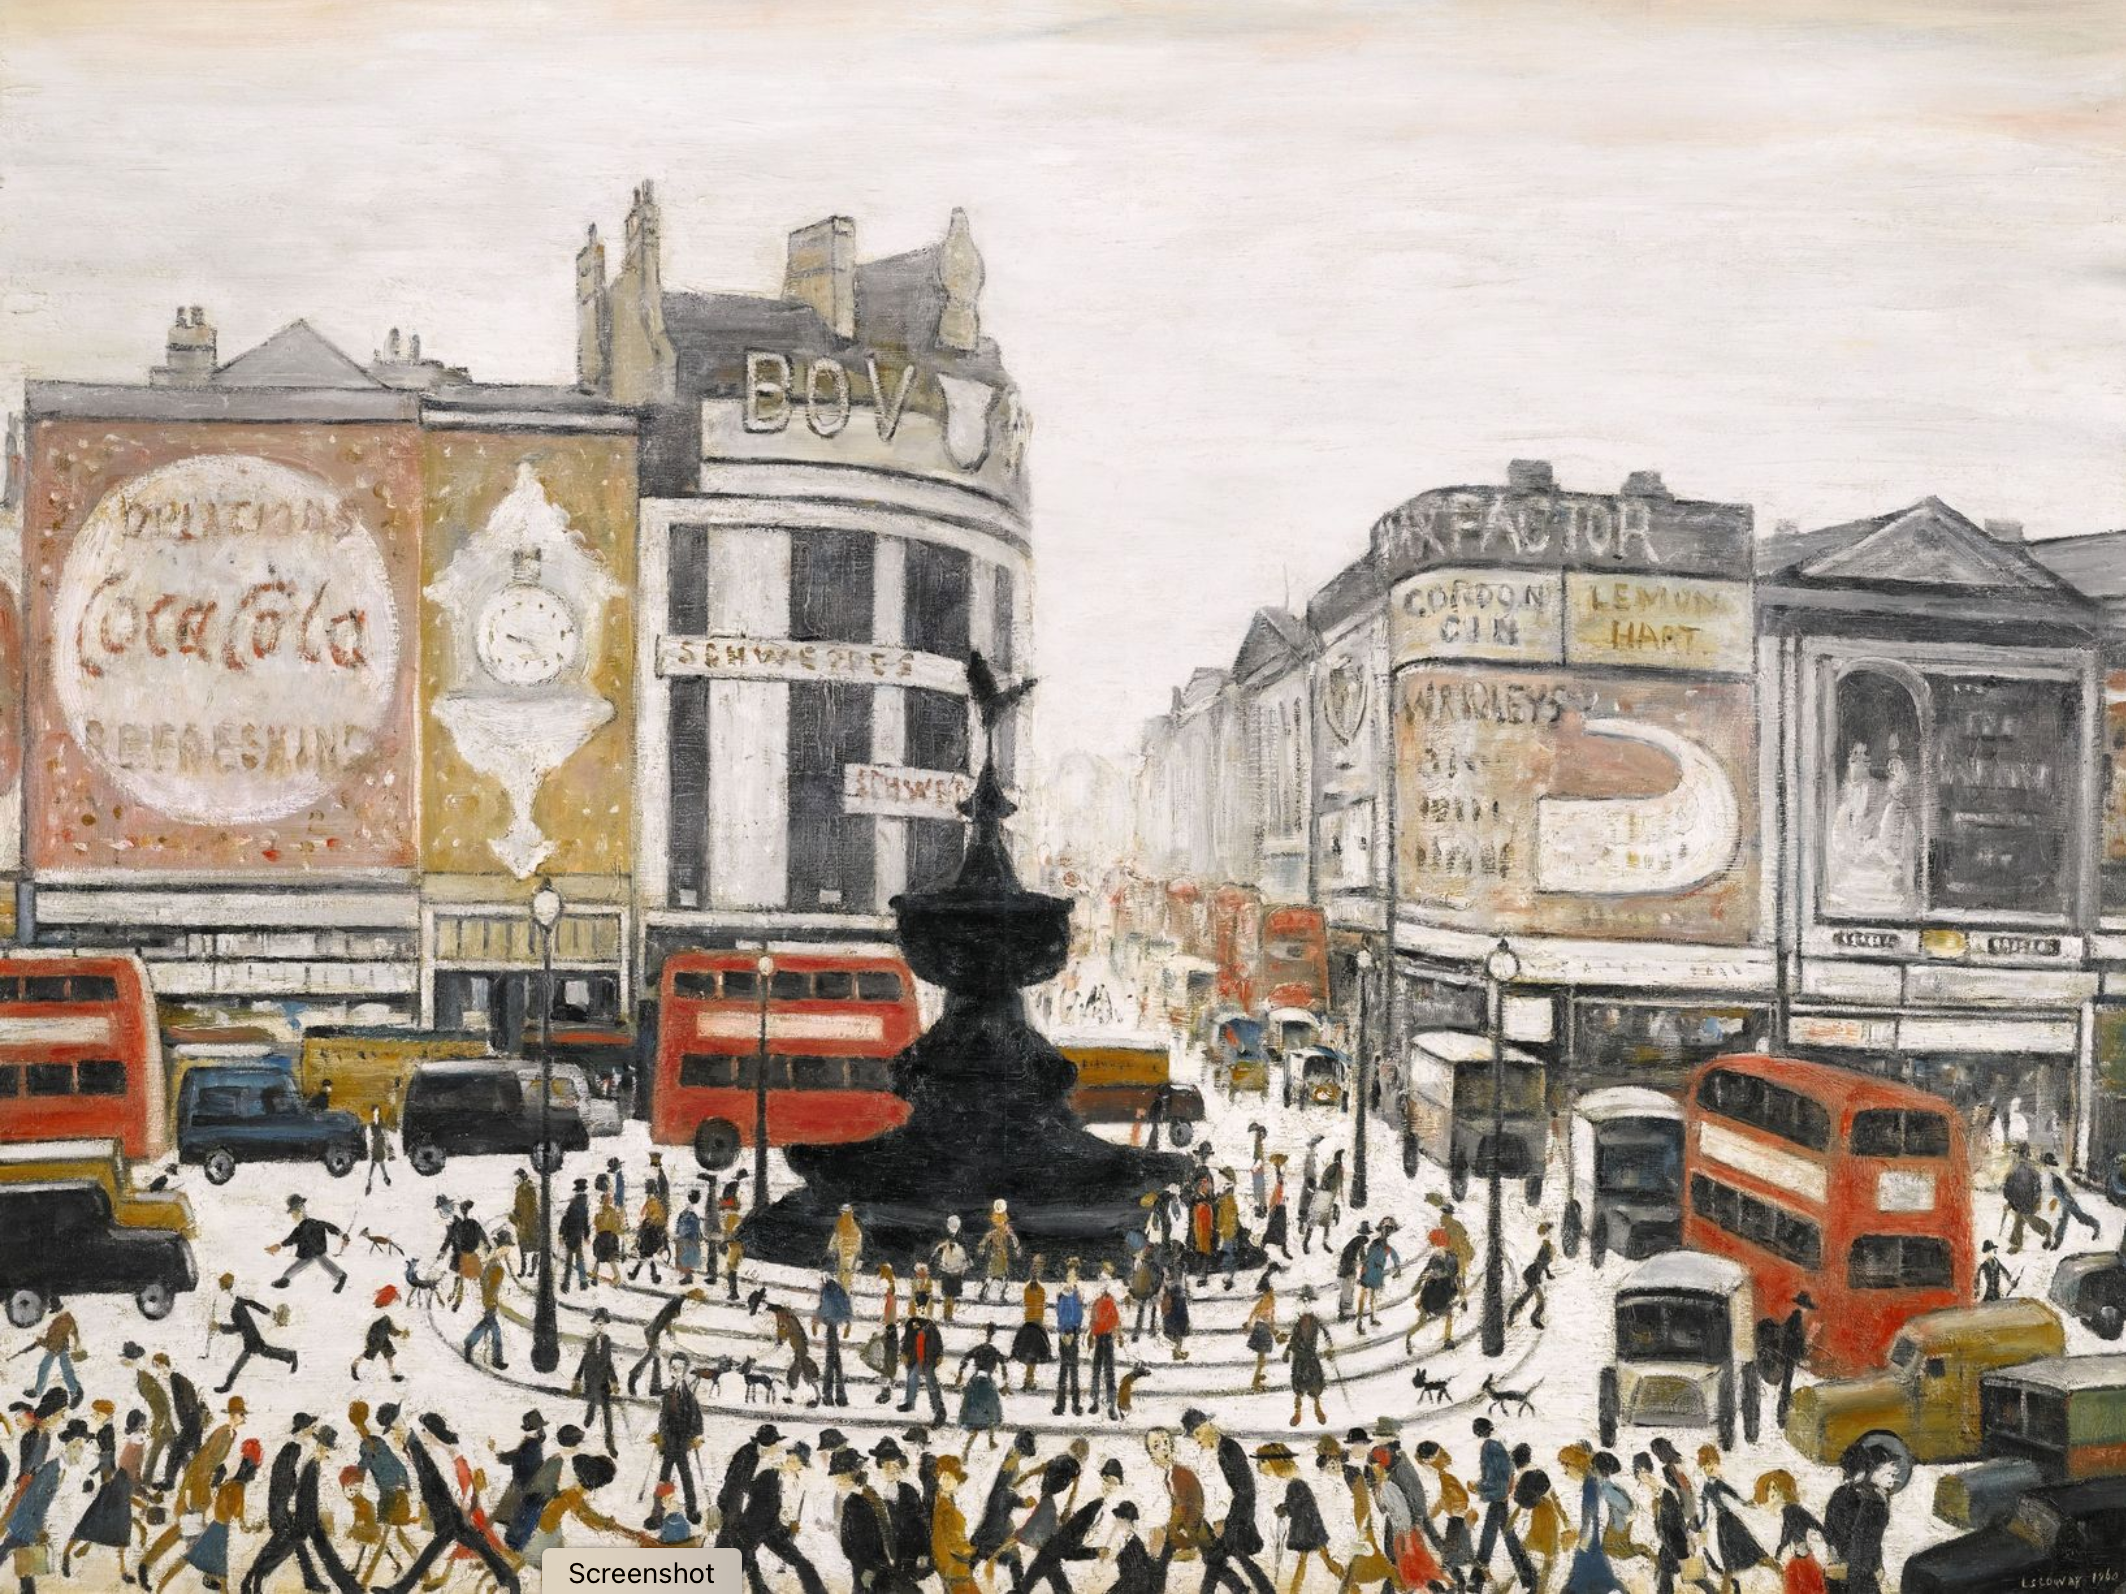 Piccadilly Circus, London (1960) by Laurence Stephen Lowry (1887 - 1976), English artist.